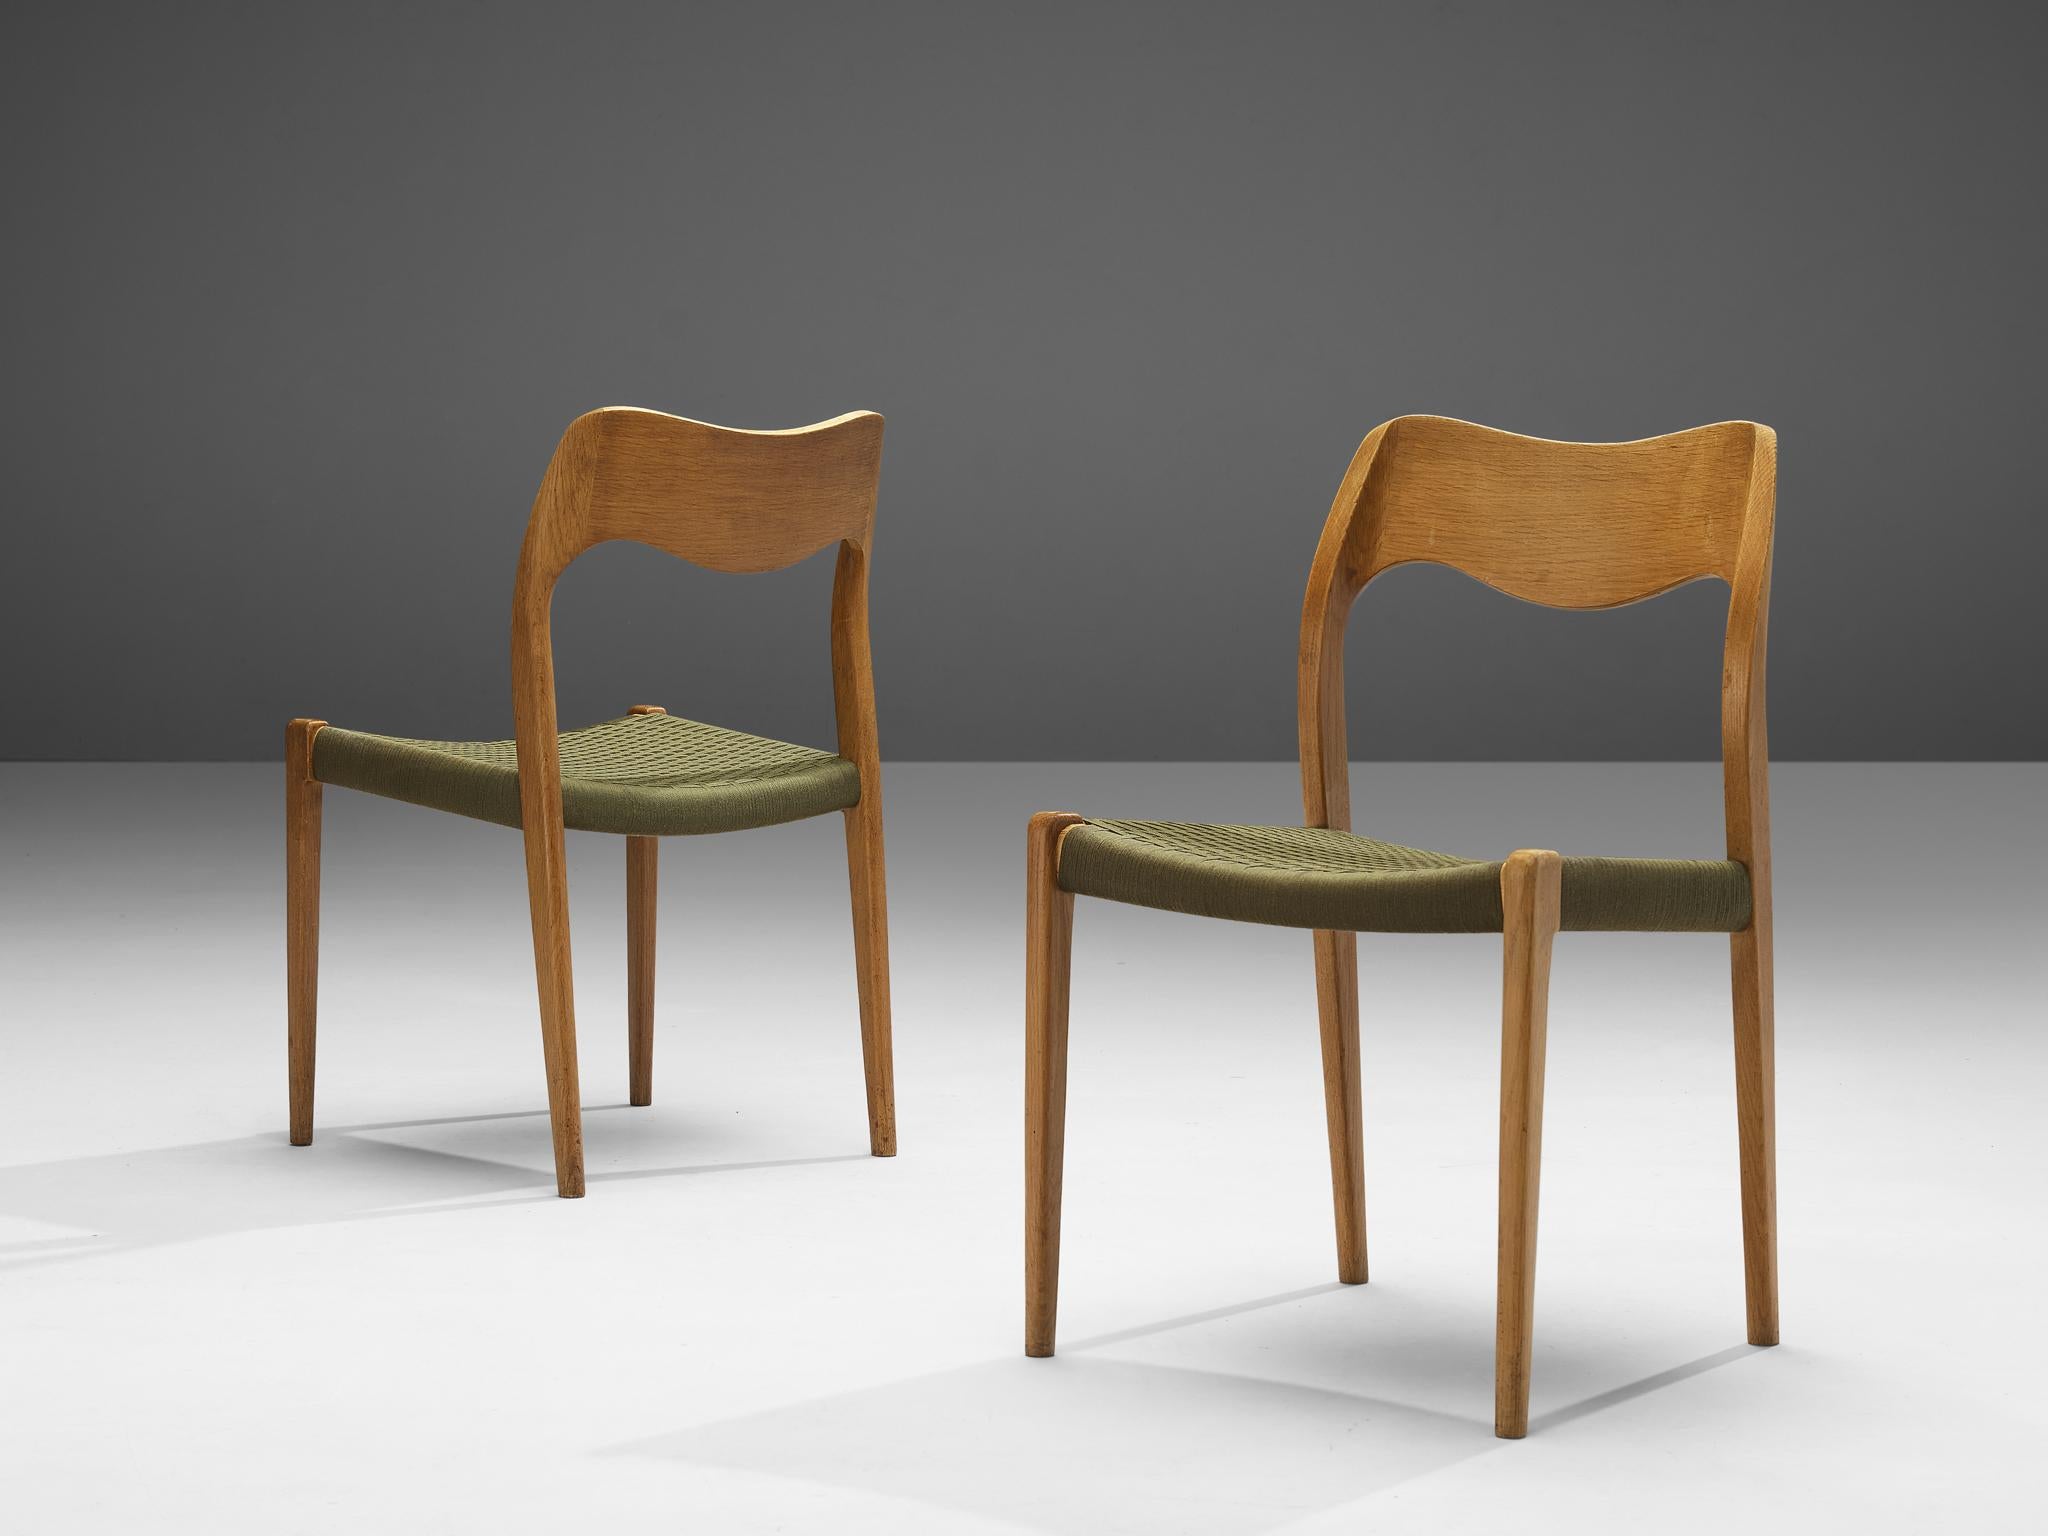 Niels O. Møller for Imperial Møbler, dining chairs model 71, teak and cane, Denmark, 1950s.

These chairs designed by Niels Møller show subtle lines and beautiful curves of the woodwork. The backs of the chairs feature the iconic waved back, giving